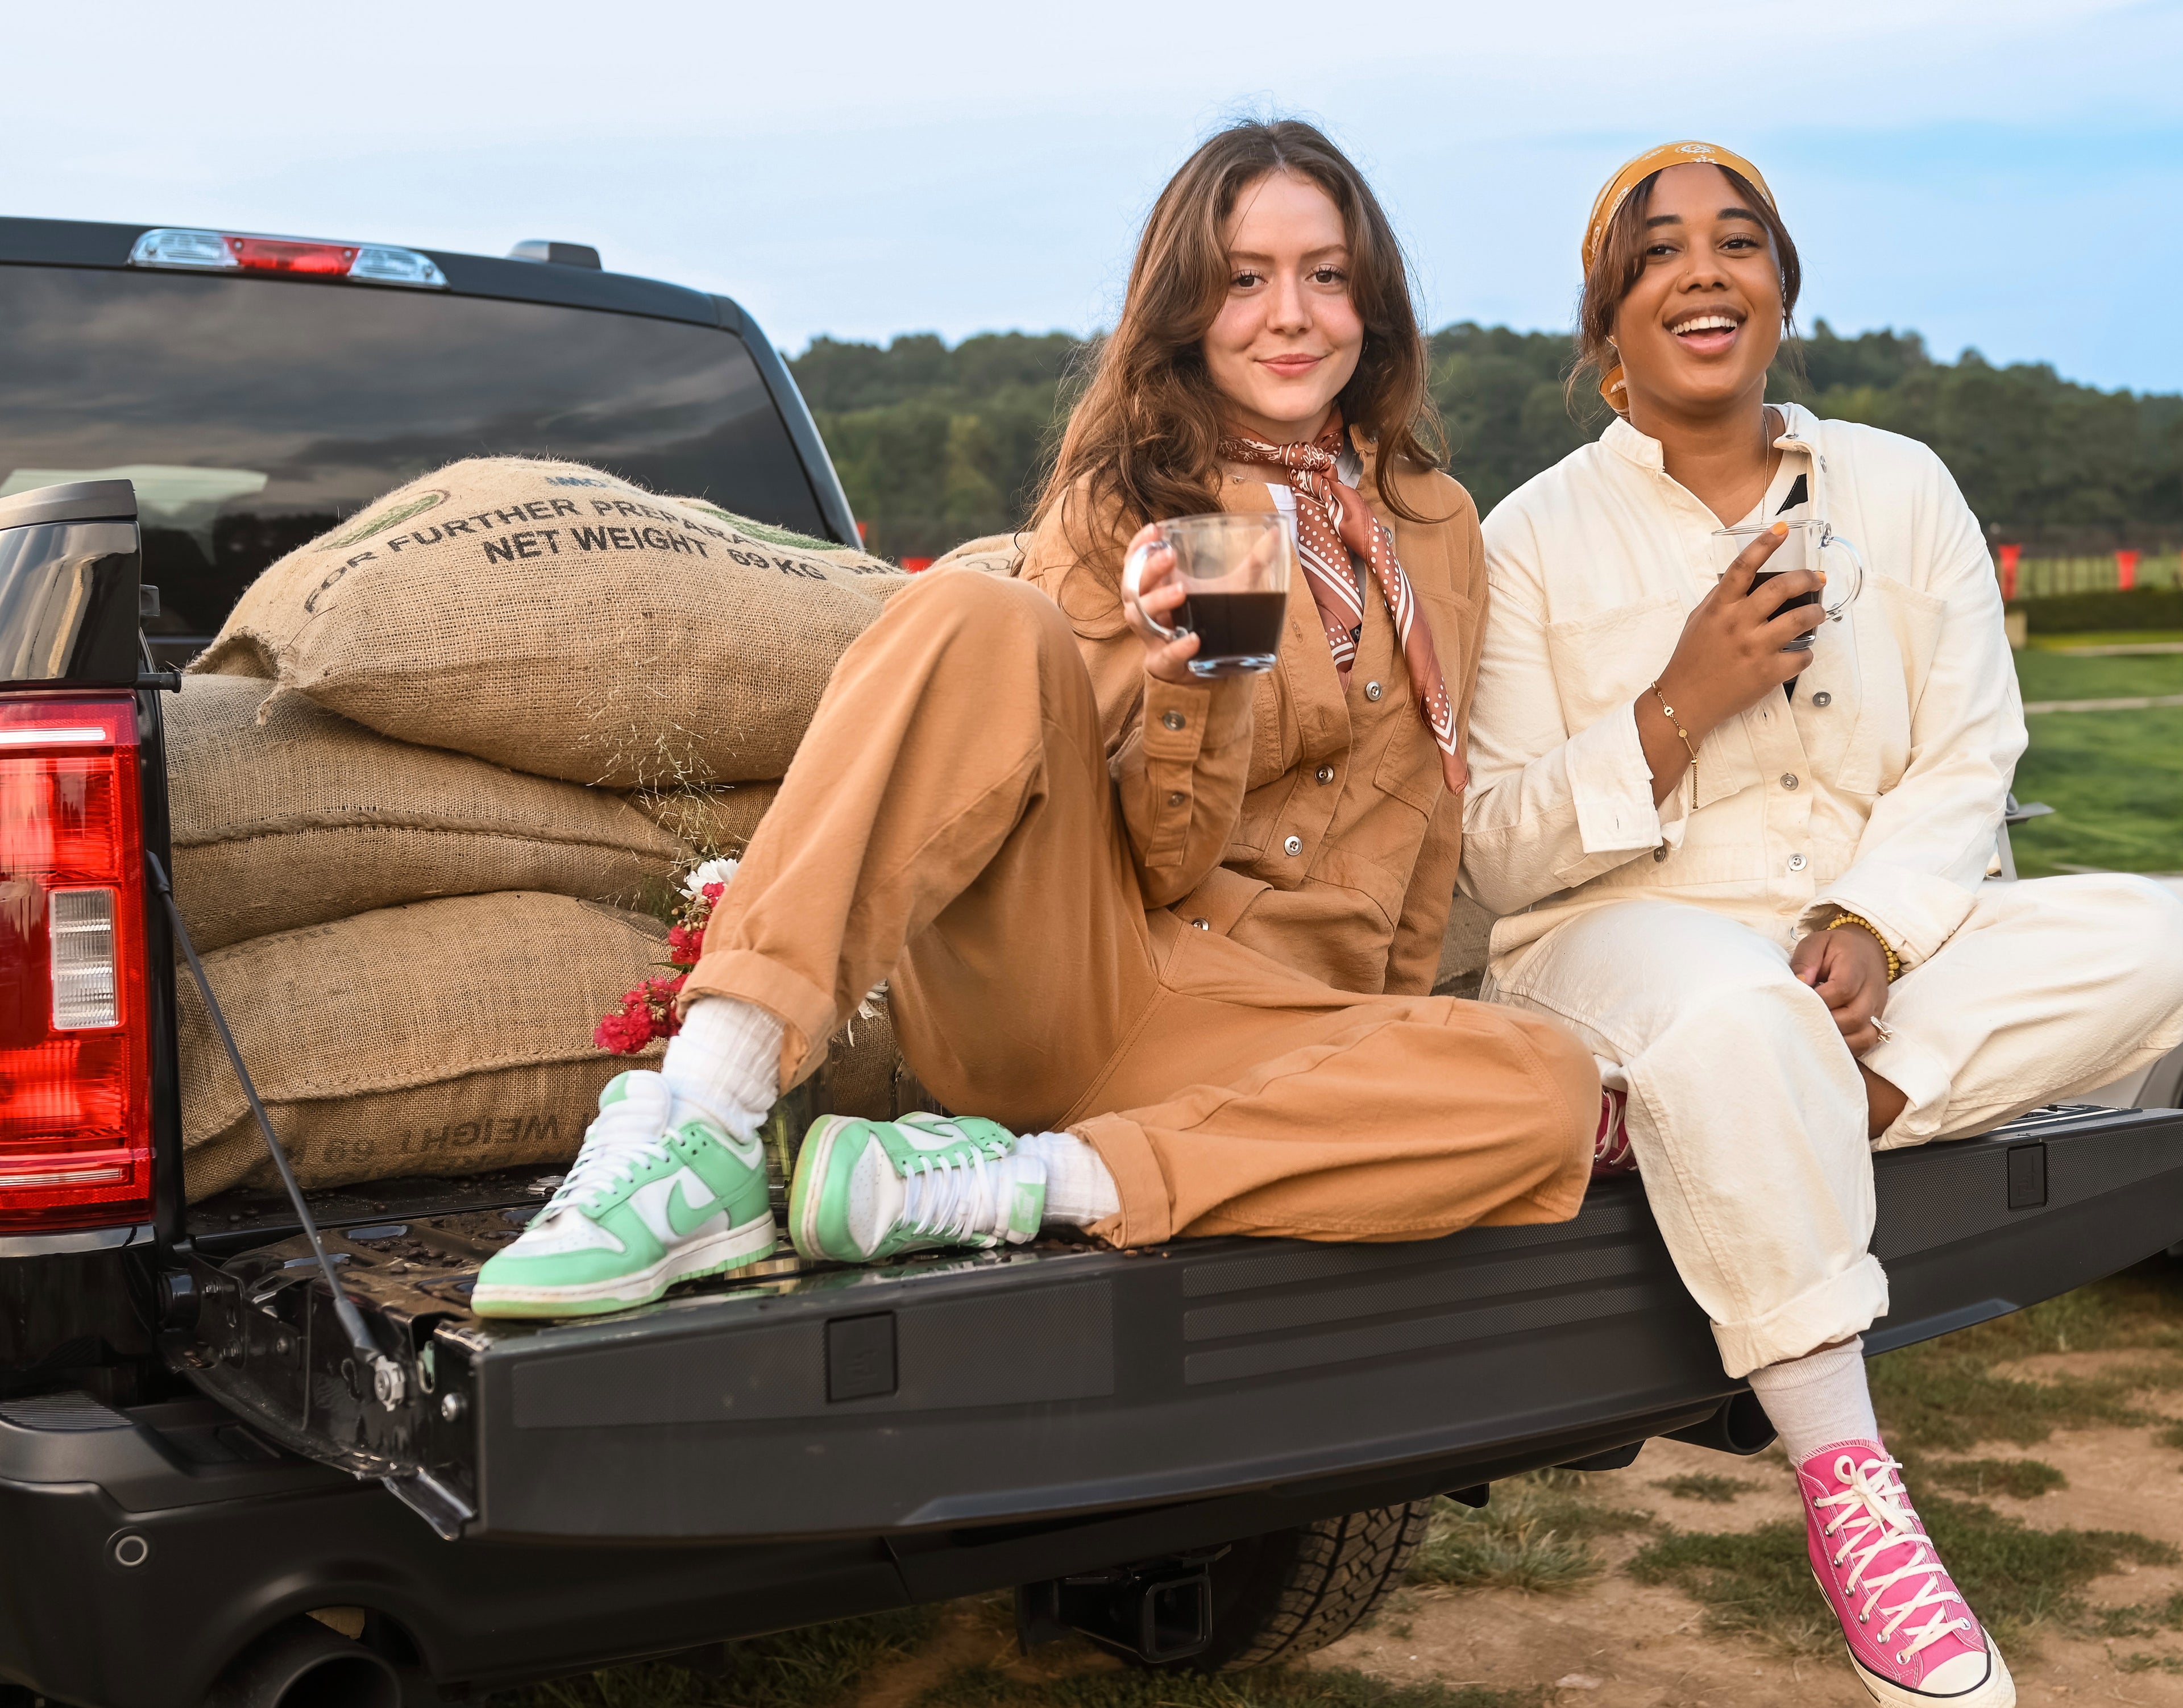 Owners Debra and Isabelle seating in the back of a pick up truck, posing with sacks of beans while holding a cup of coffee